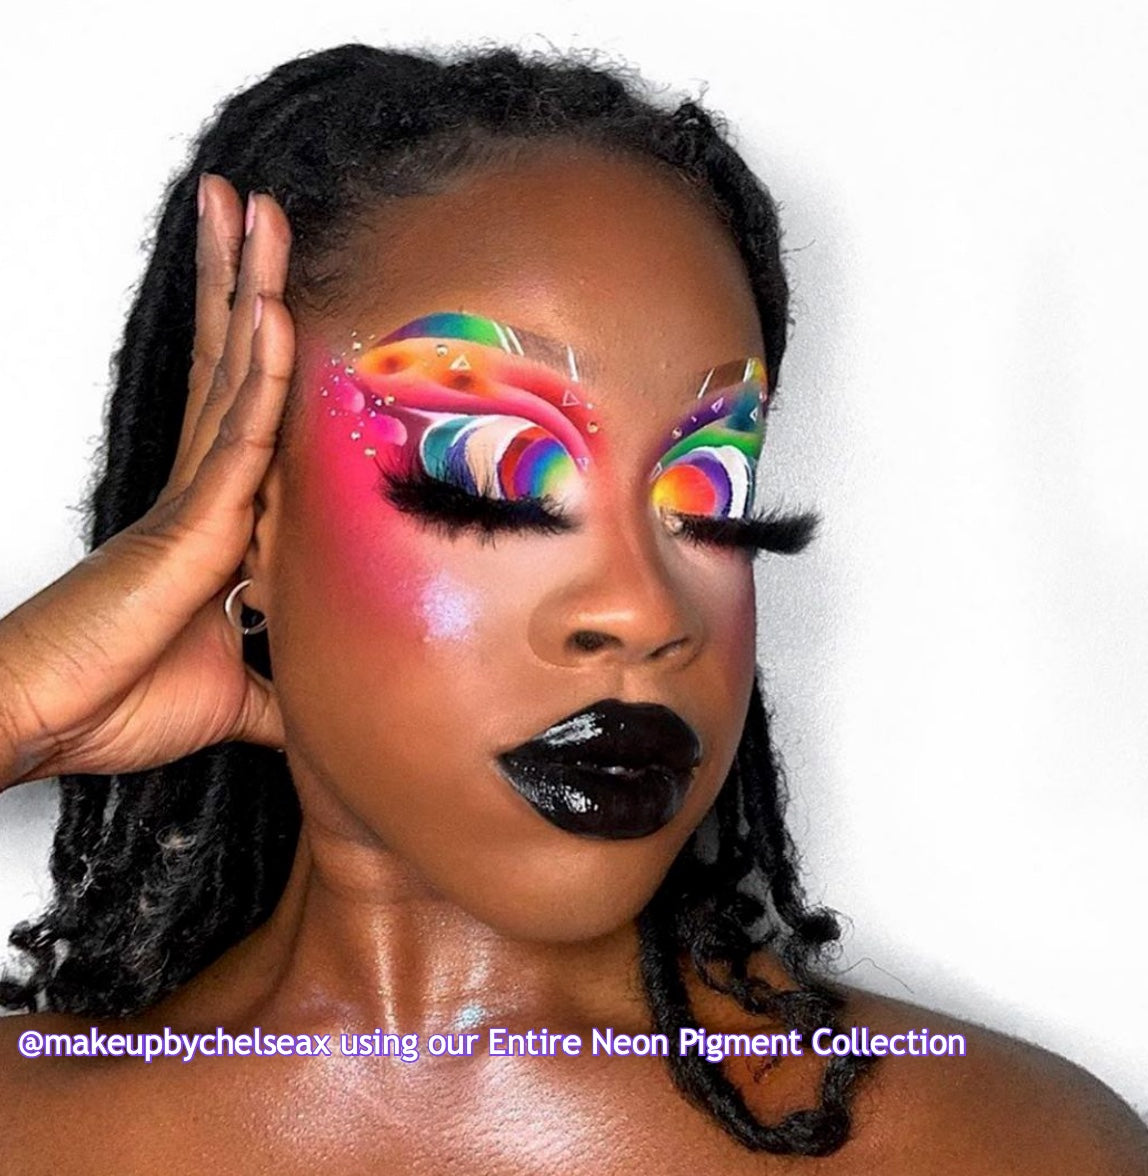 Take Two Cosmetics - Dare To Be Bold Neon Pigment